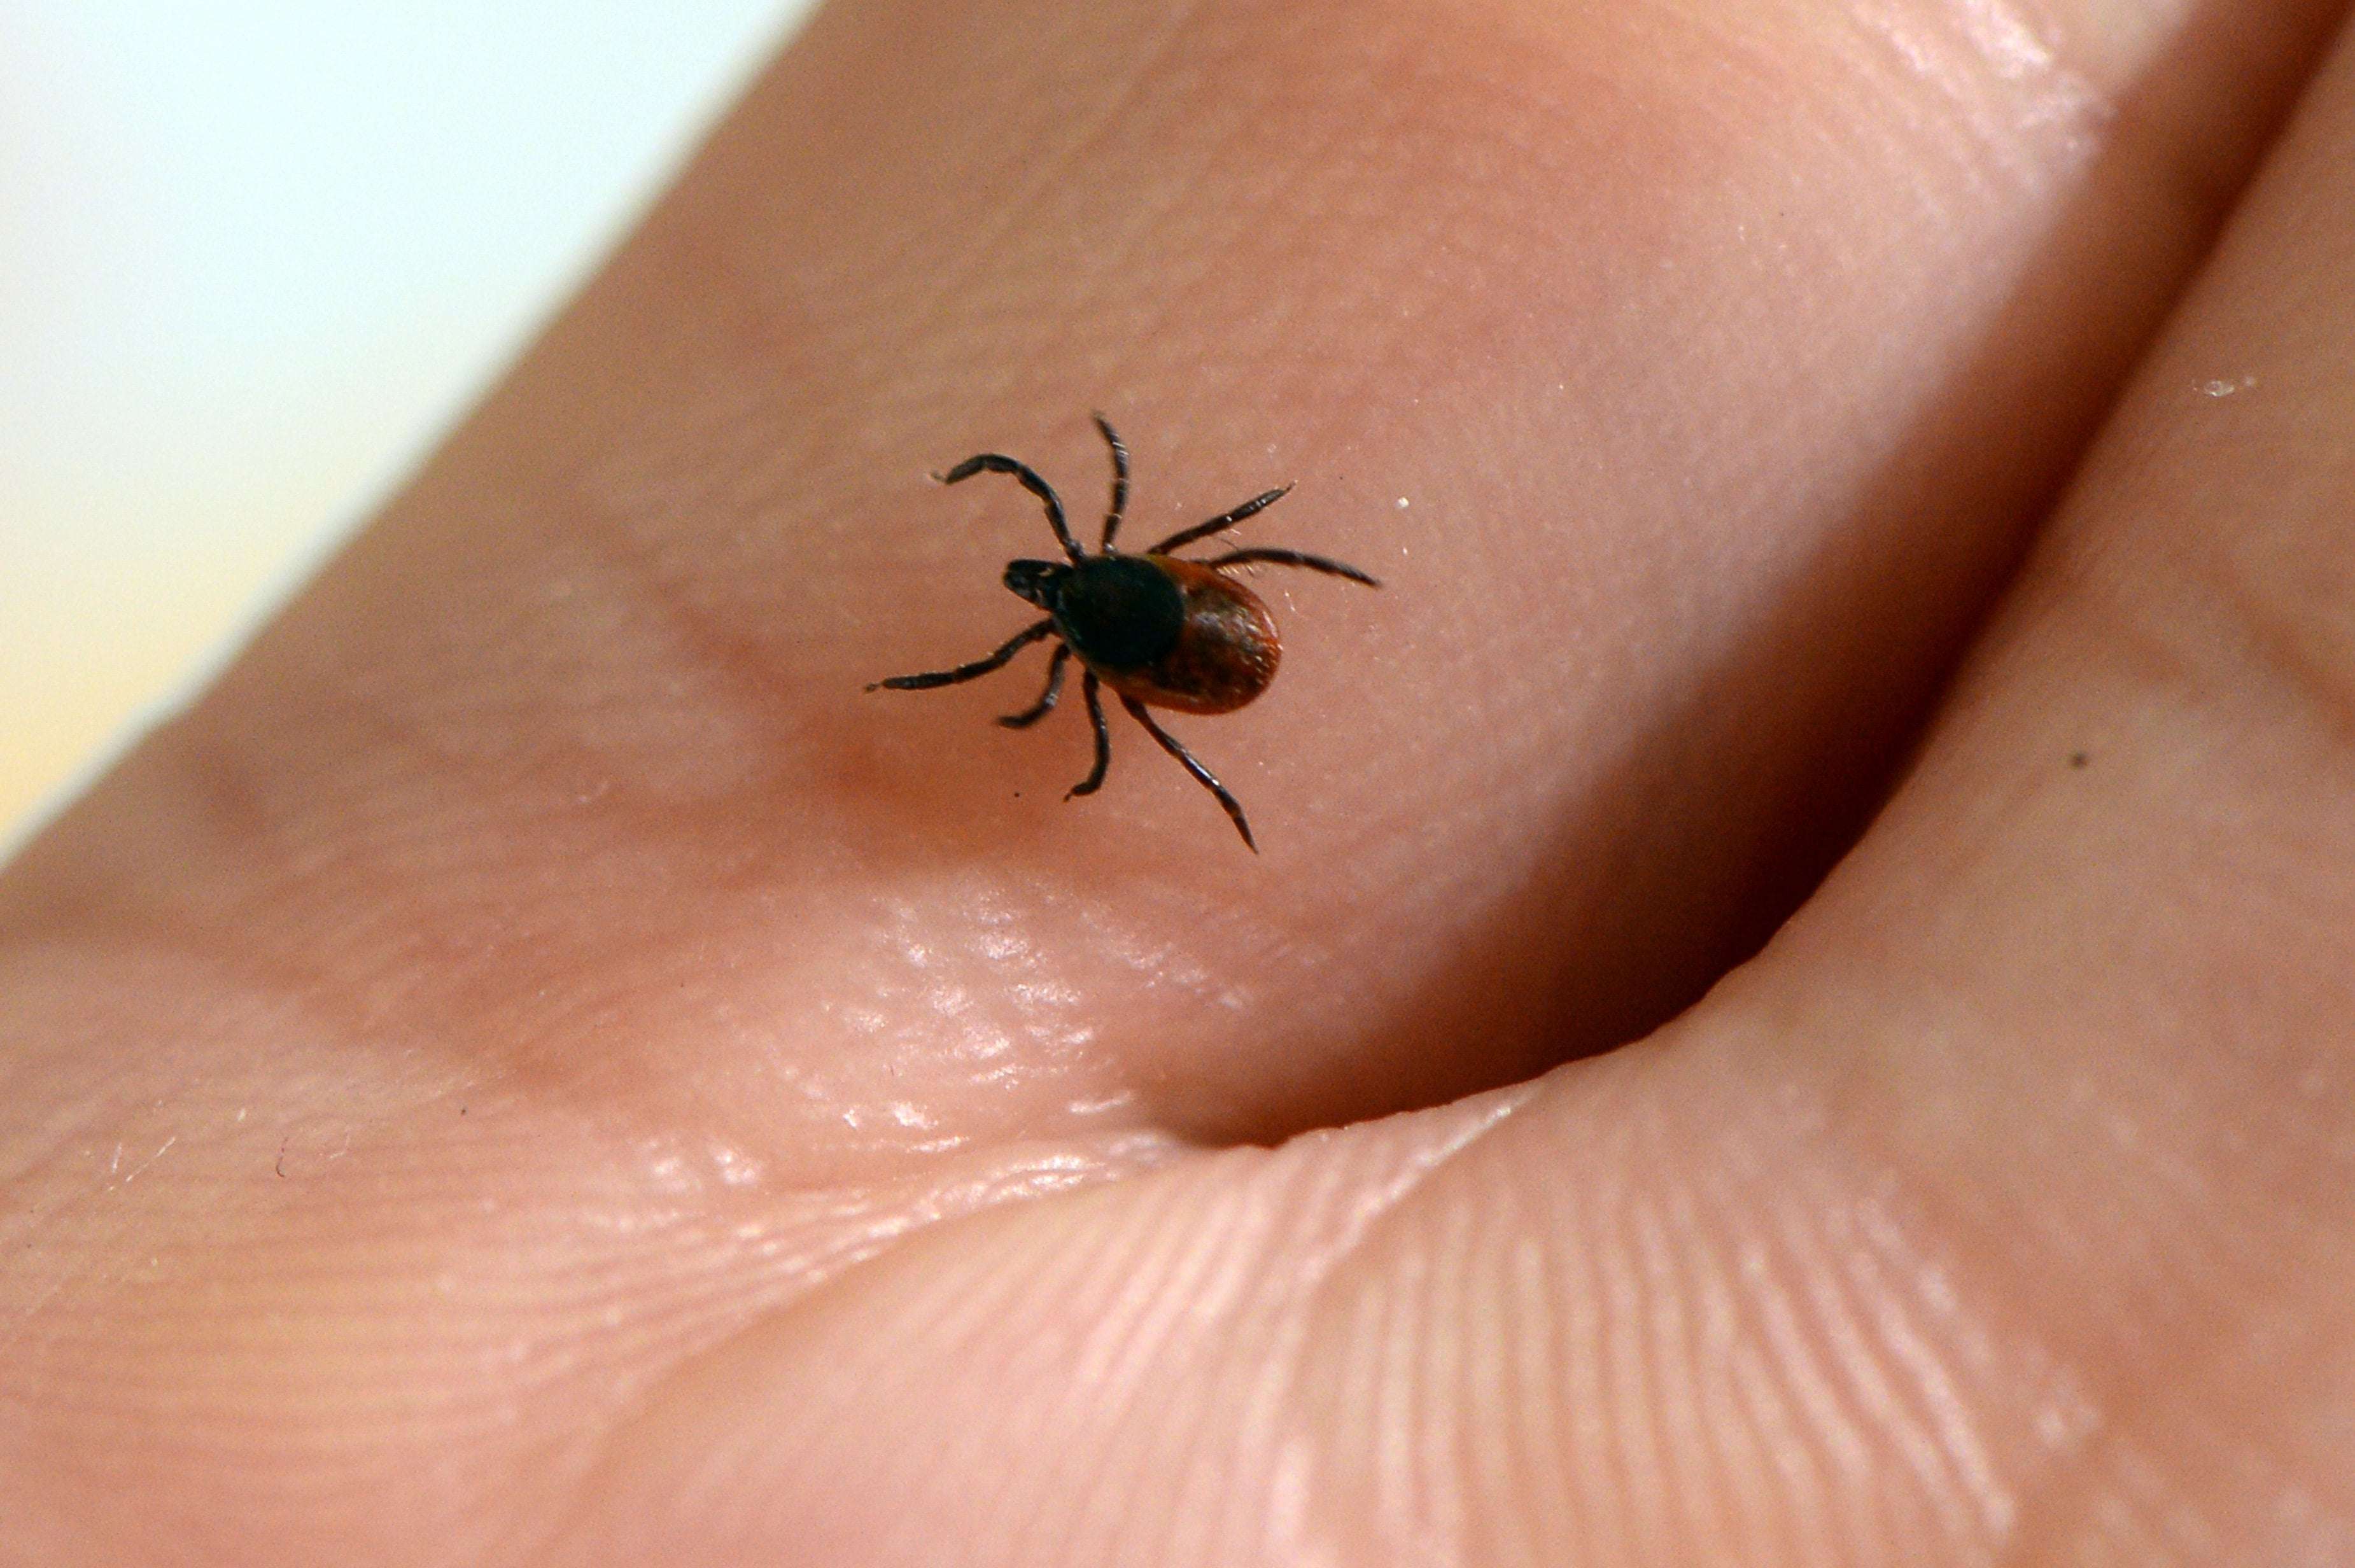 image for Scientists Develop Game-Changing Vaccine Against Lyme Disease Ticks